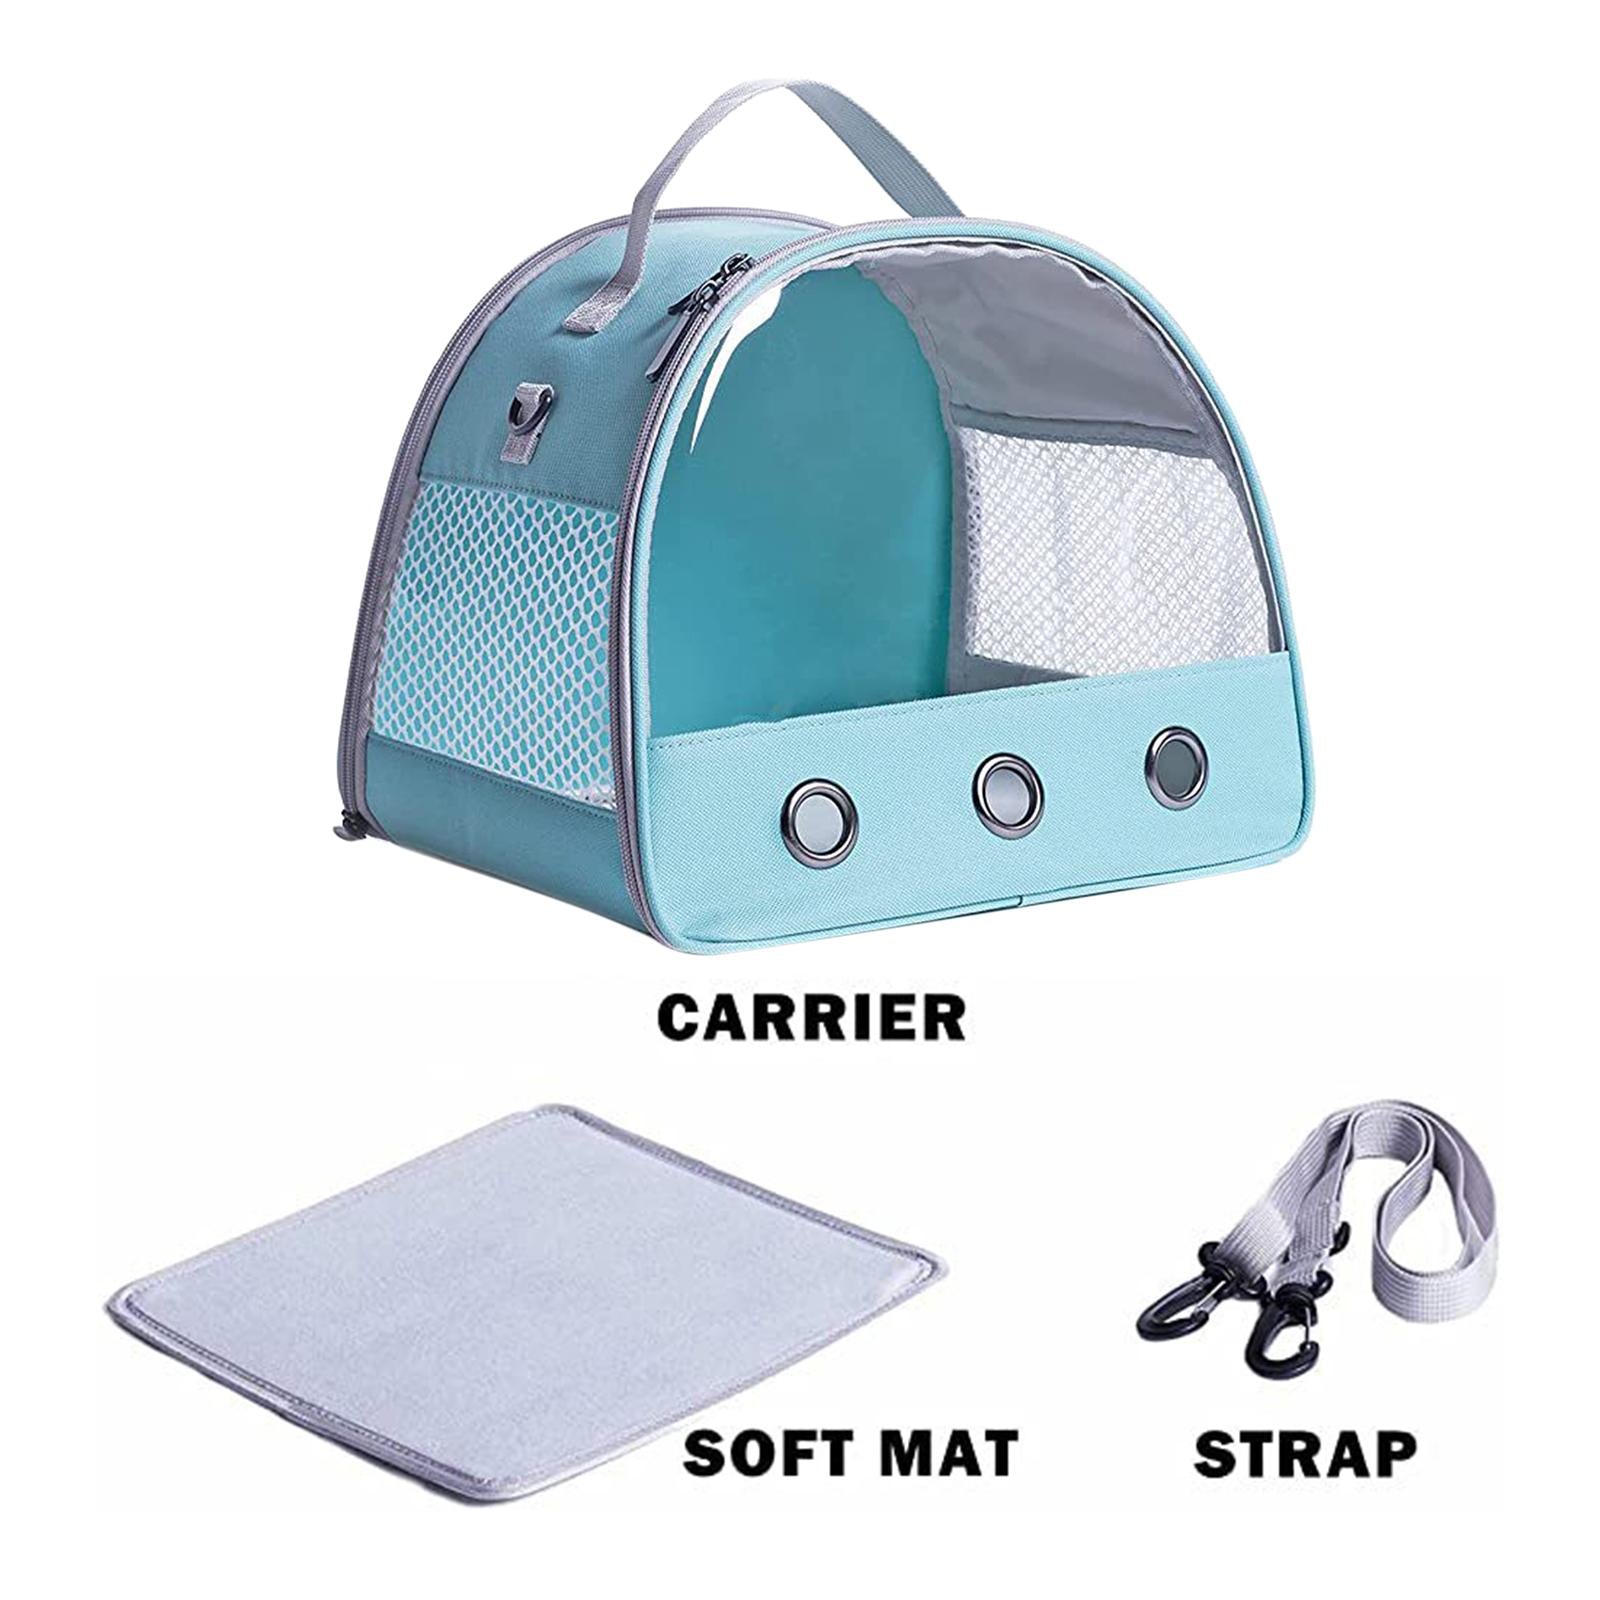 Pet Carrier Backpack for Dogs and Cats,,Fully Ventilated Mesh Designed for Travel Hiking, Walking Outdoor